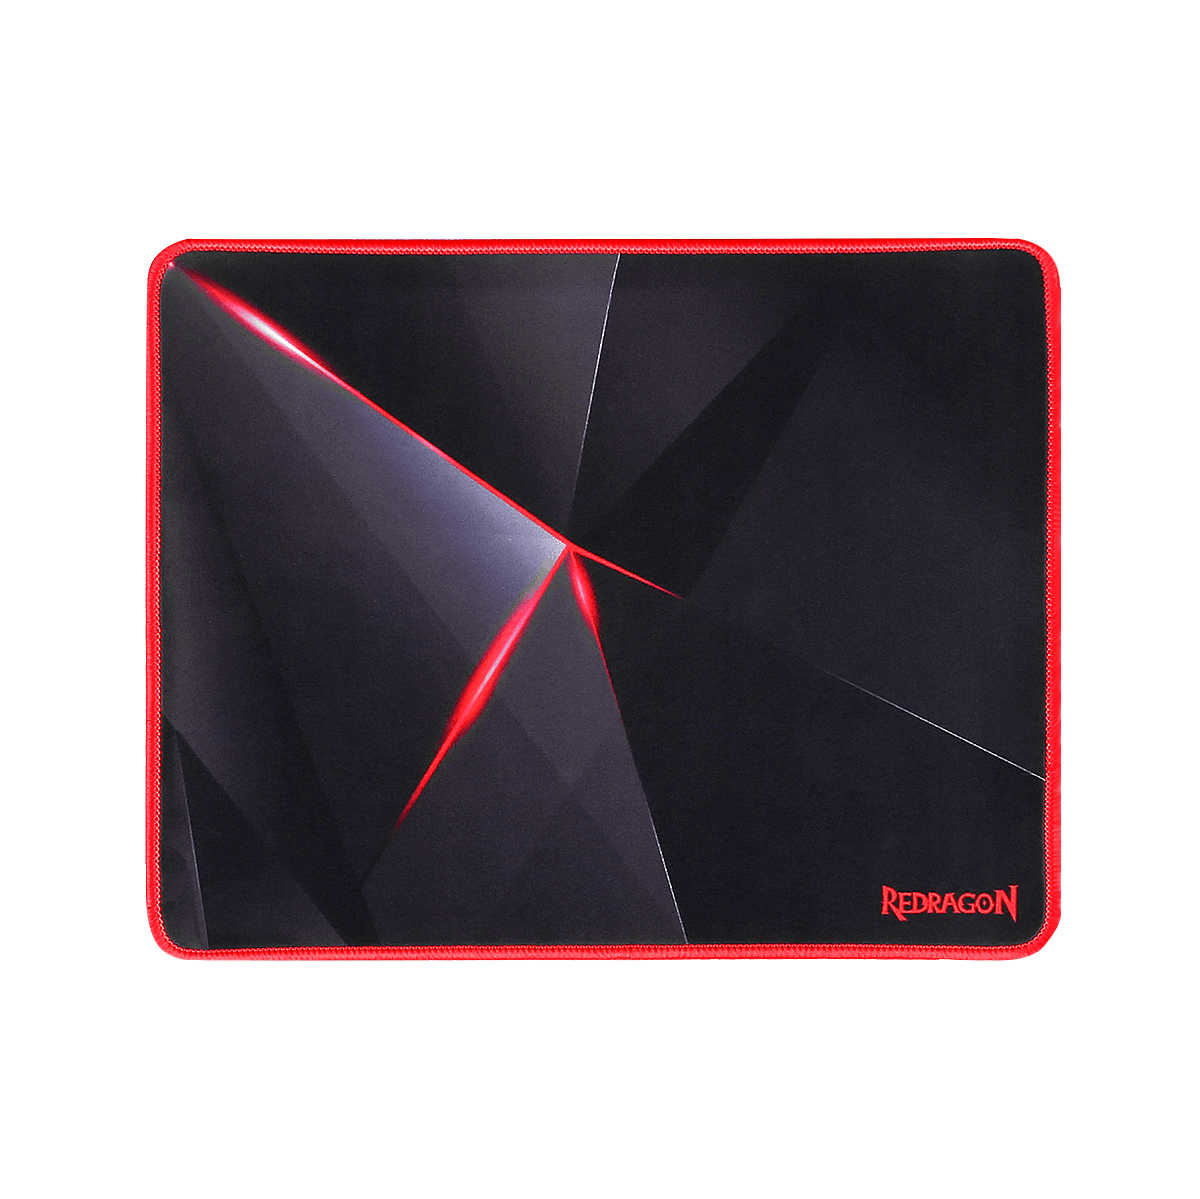 P012 Gaming Mouse Pad